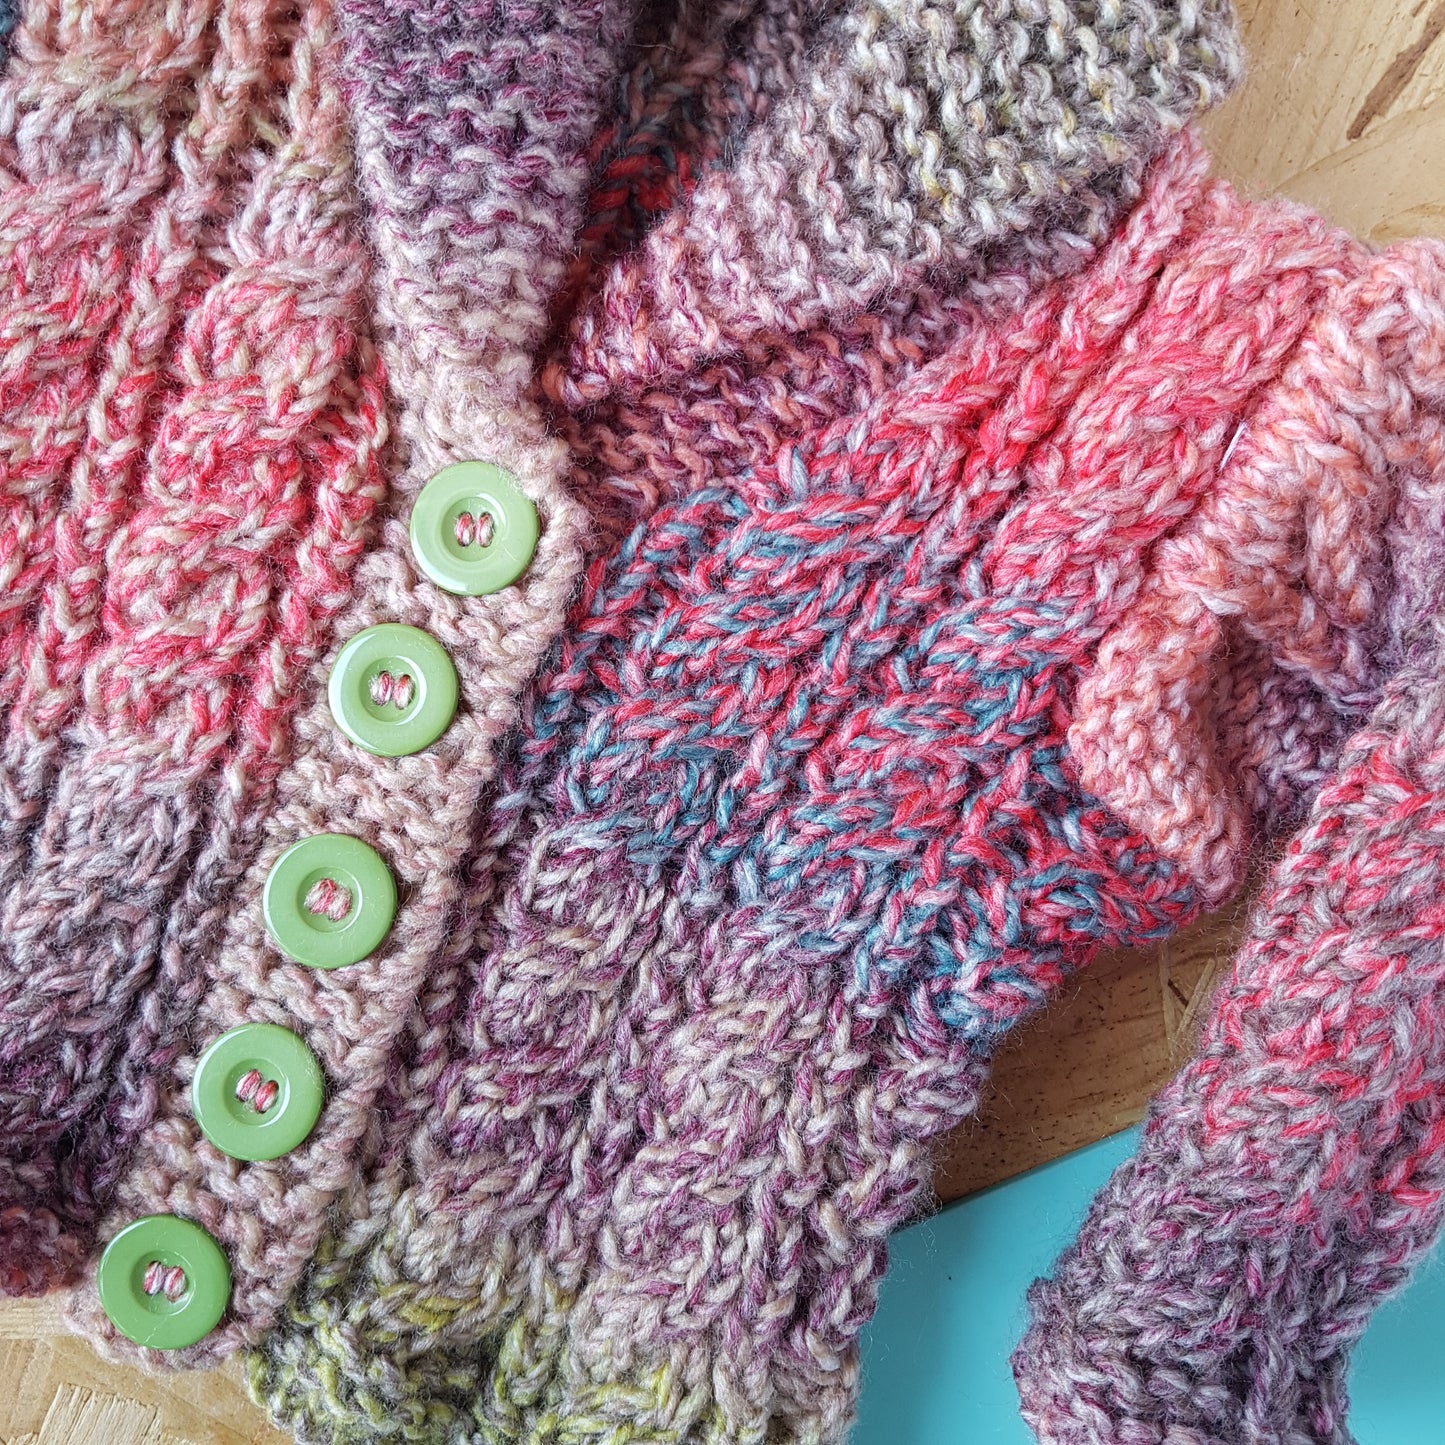 Ombre Cable Knit Cardigans 9-12 months